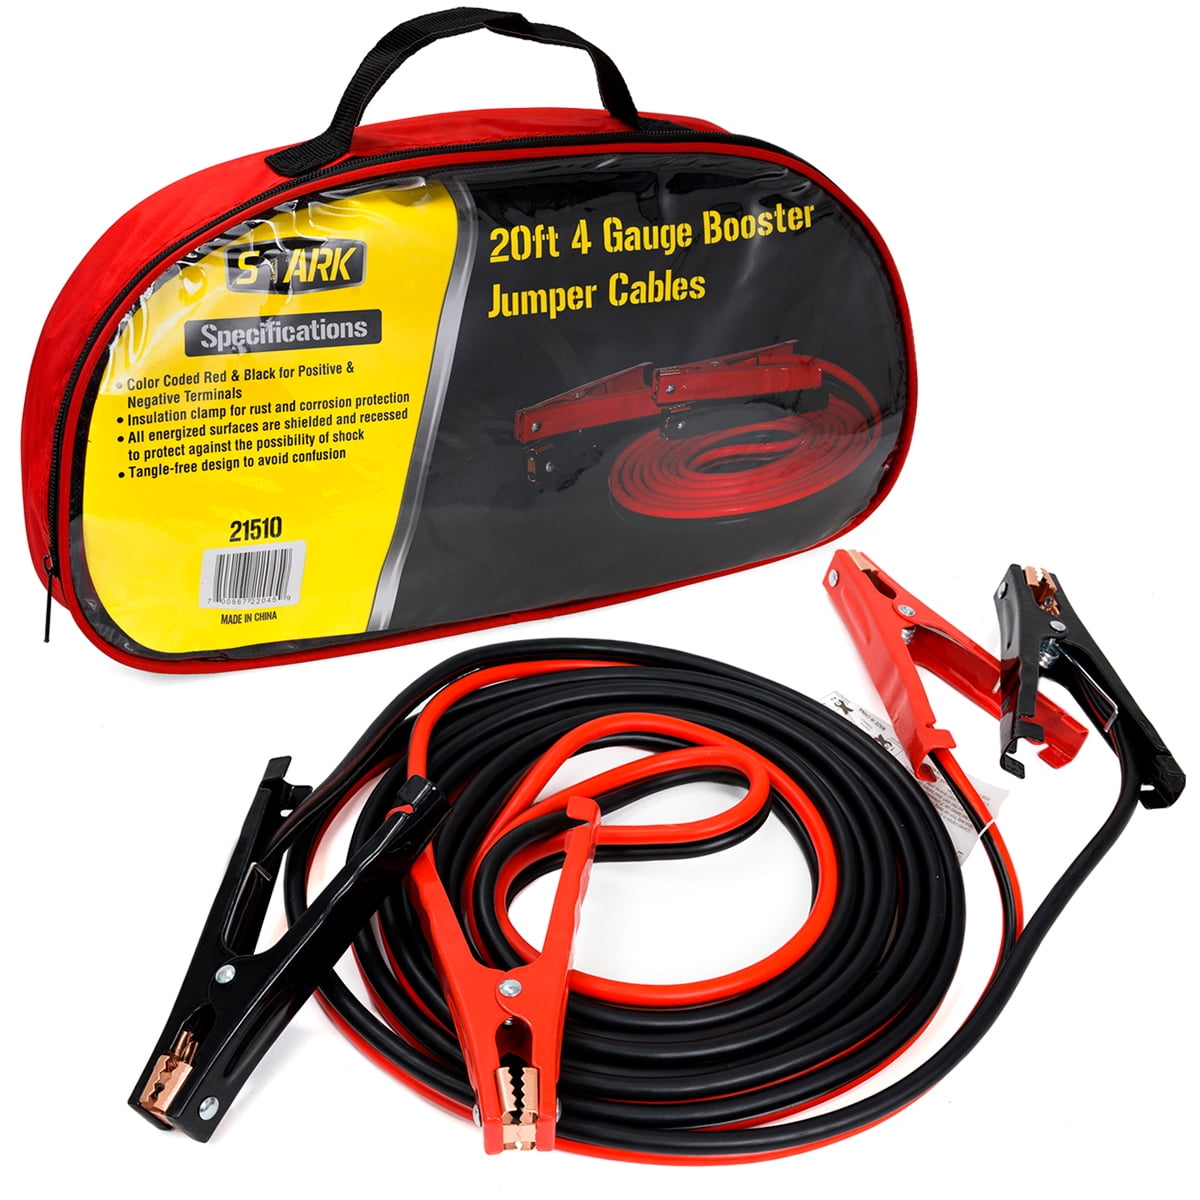 TWING Jumper Cables 2 Gauge 20 Feet Booster Cable for Battery Emergency 2AWG 20Ft 